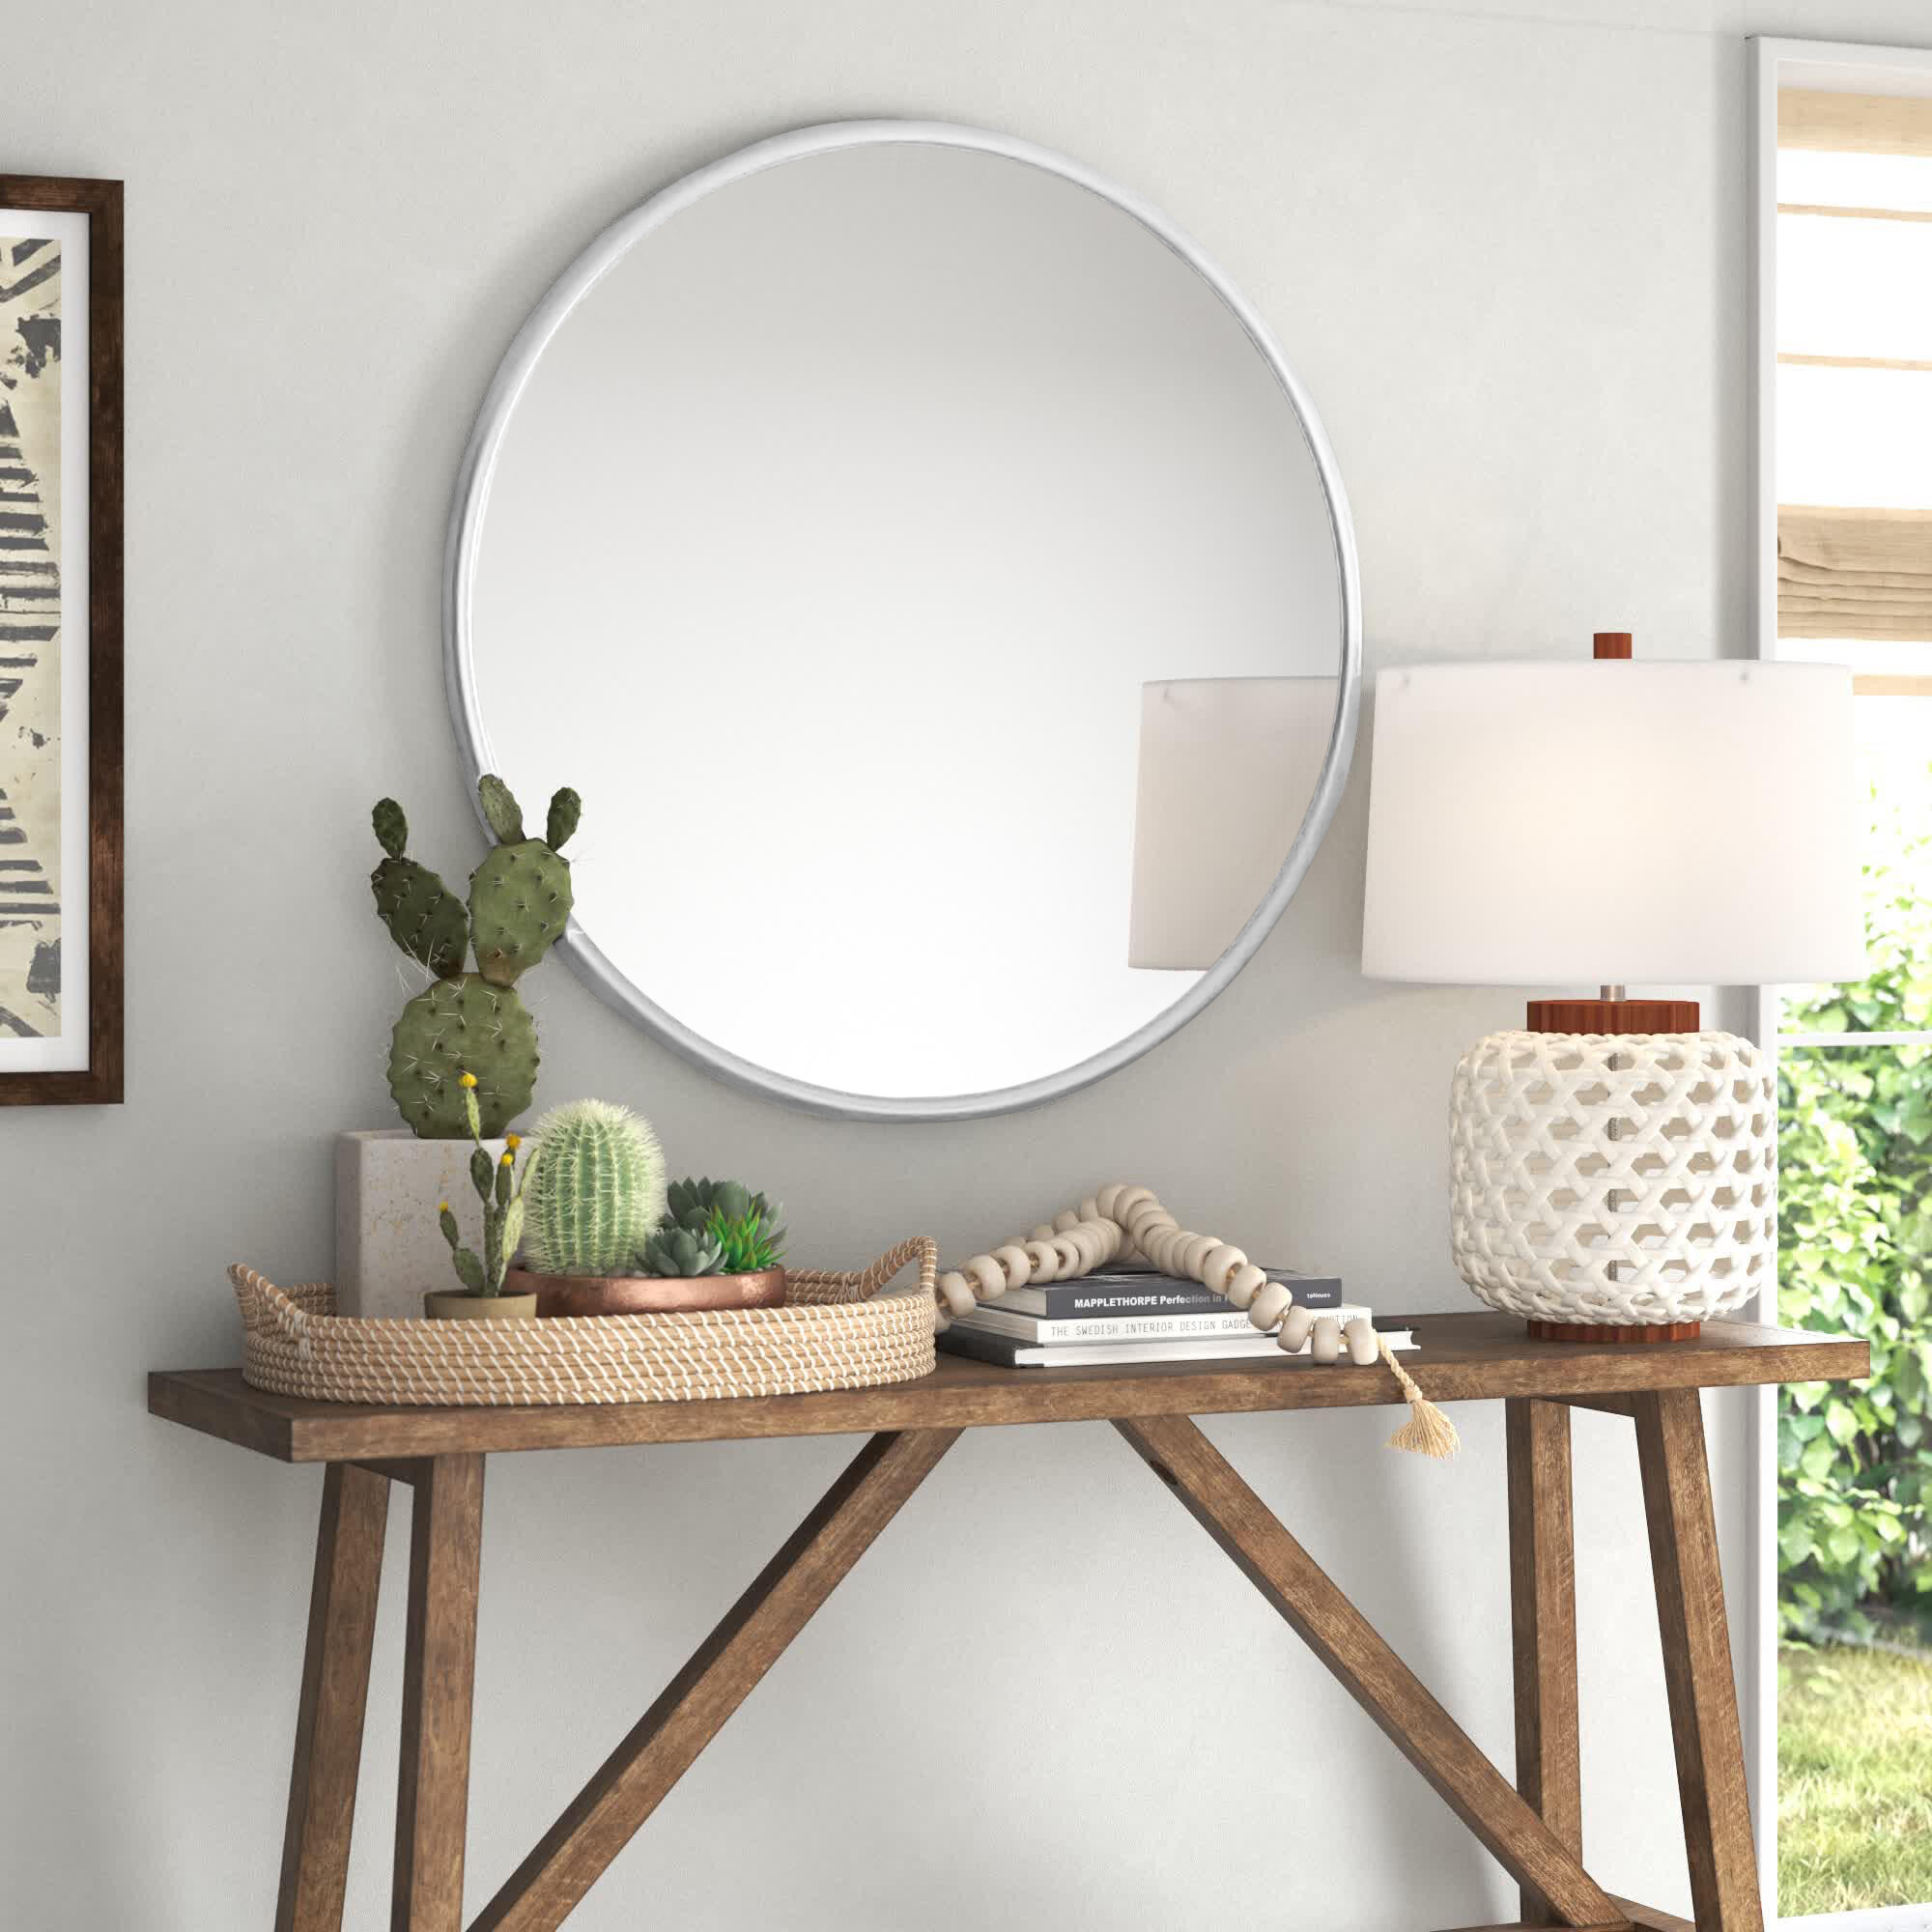 24" Round Rustic Metal & MDF Glass Mirror w Pleated Metal Frame Design NEW 